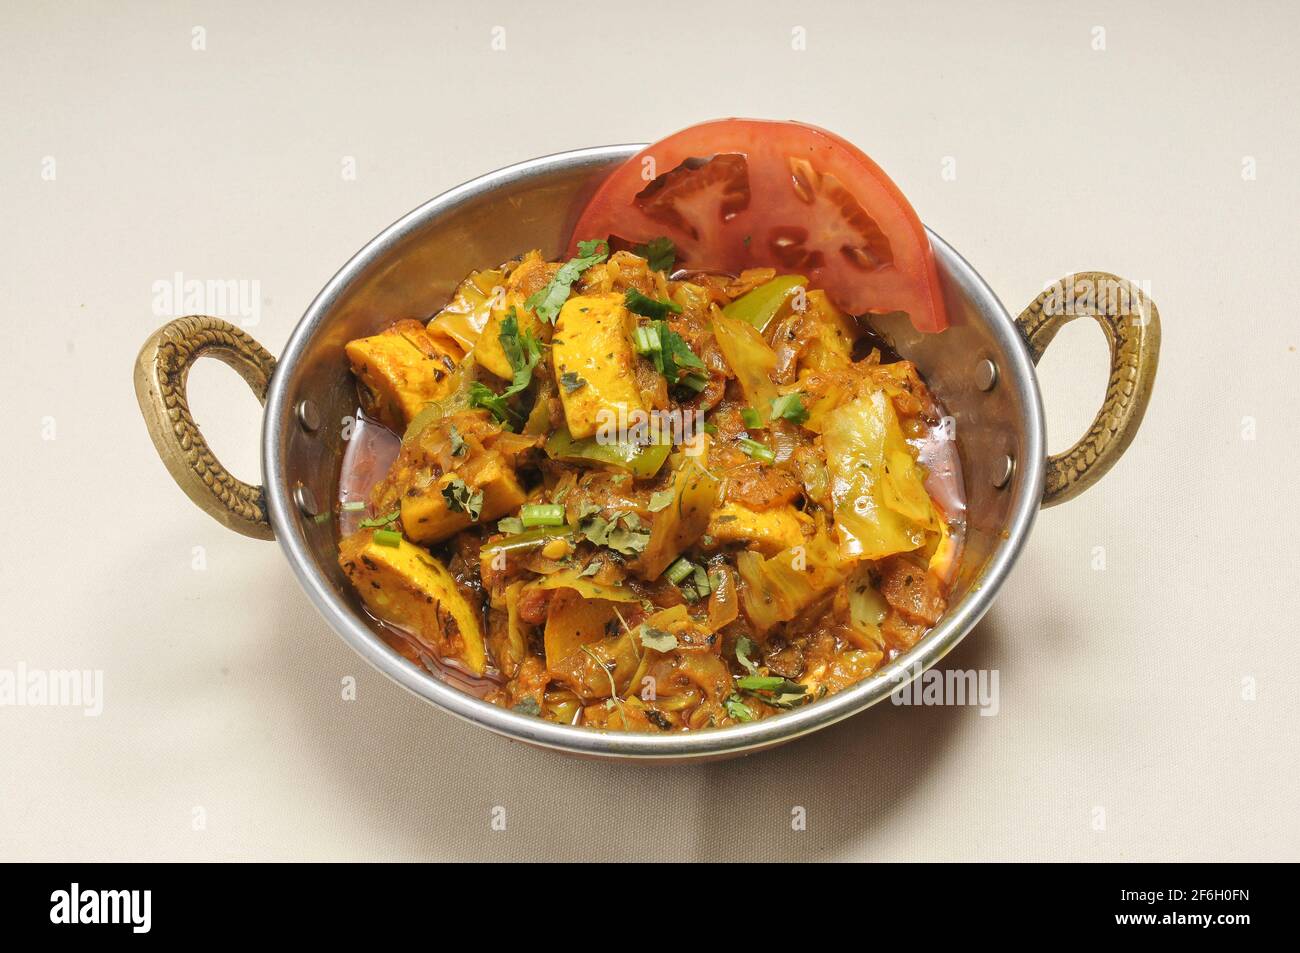 Delicious Indian cuisine known as Vegetable Jalfrezi Stock Photo